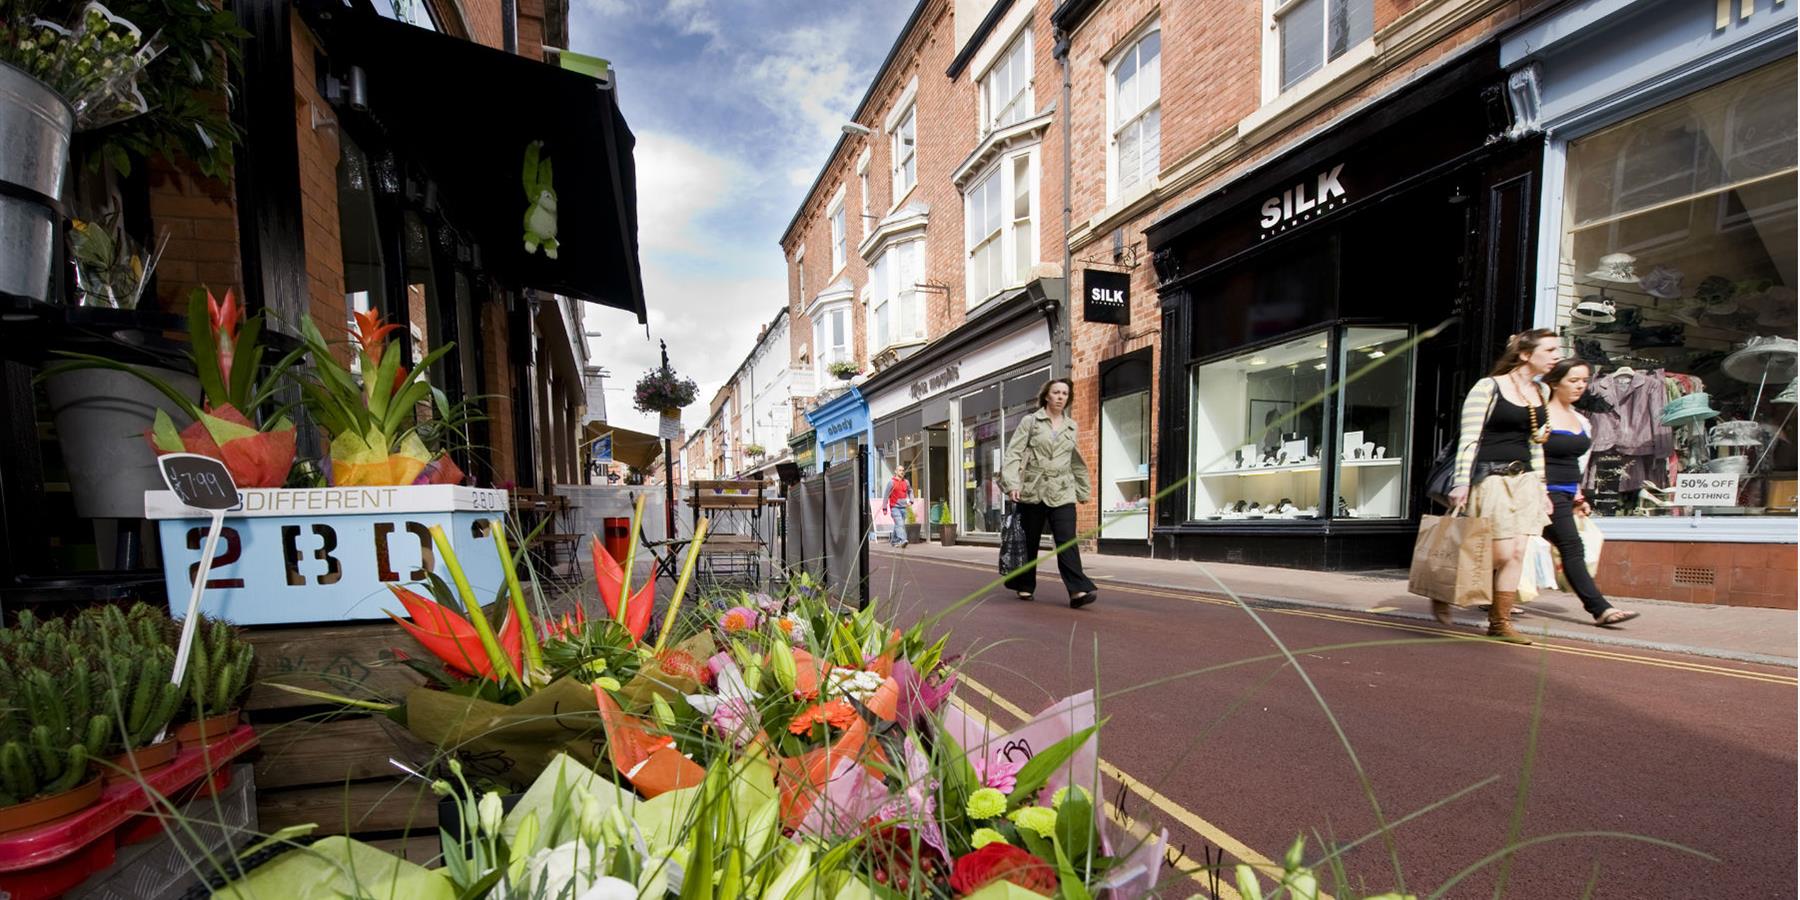 Shops and Markets, Shopping in Leicester